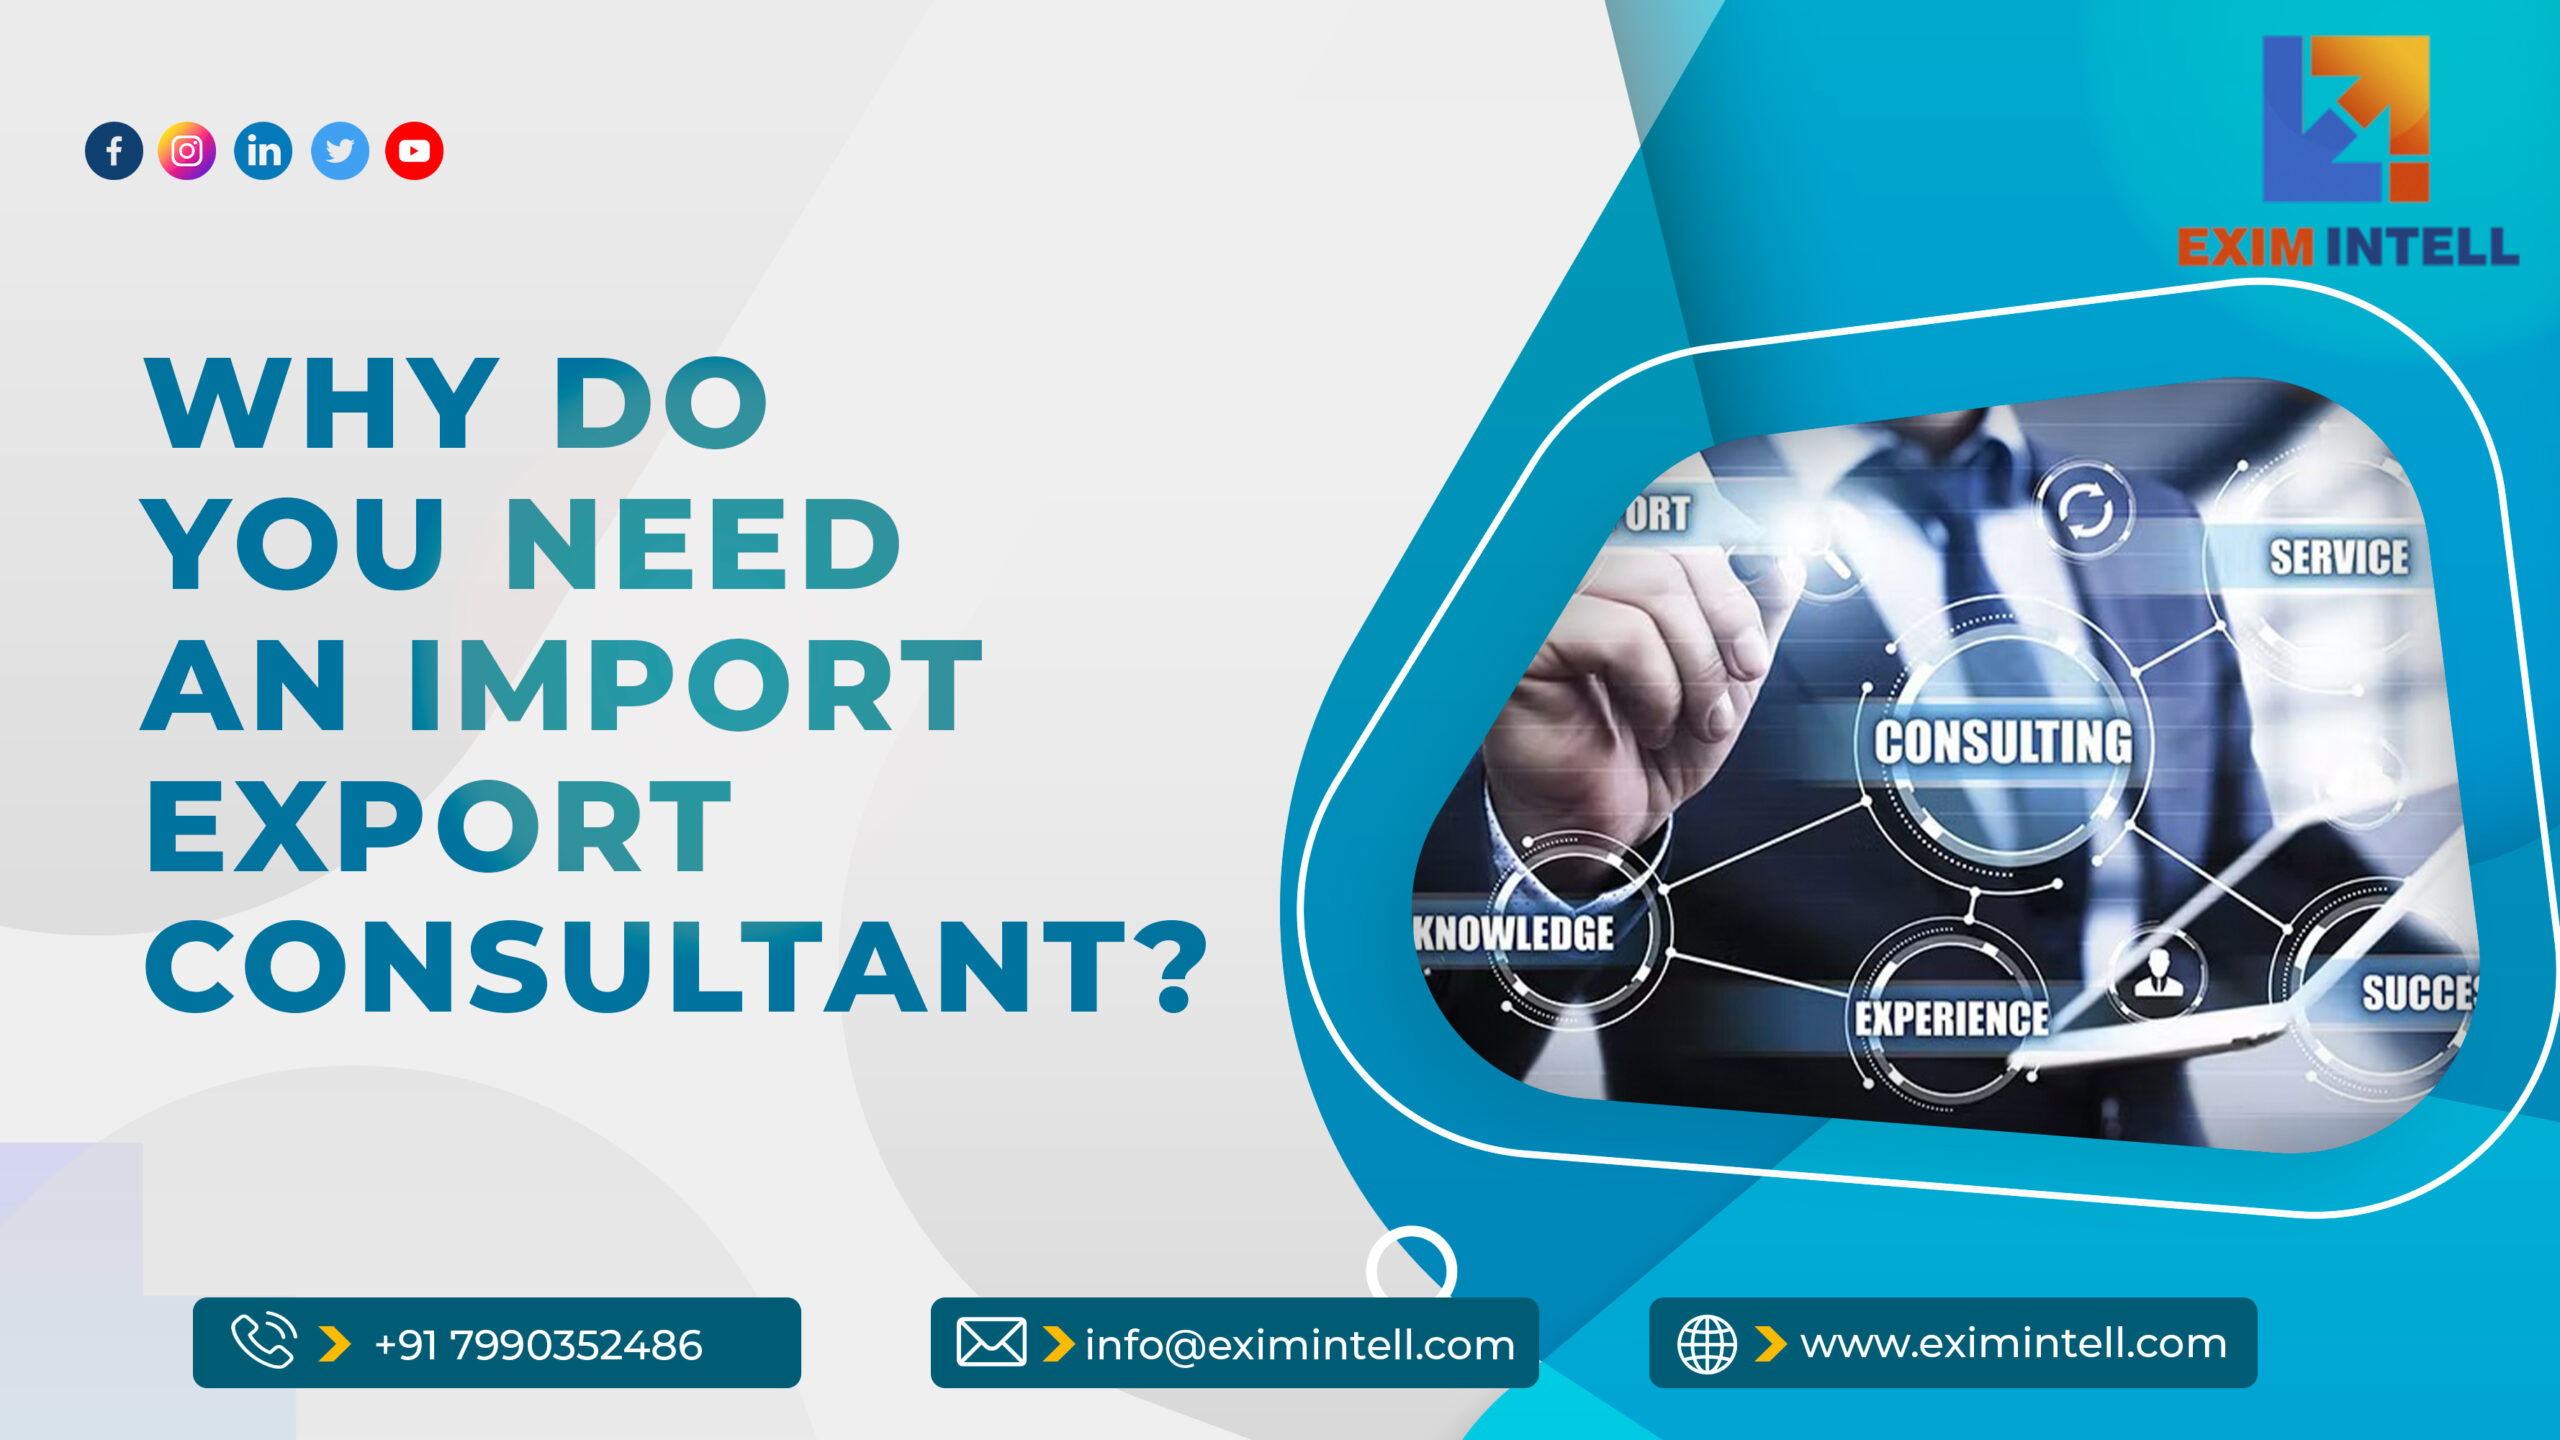 Why Do You Need Export-Import Consultant Service?